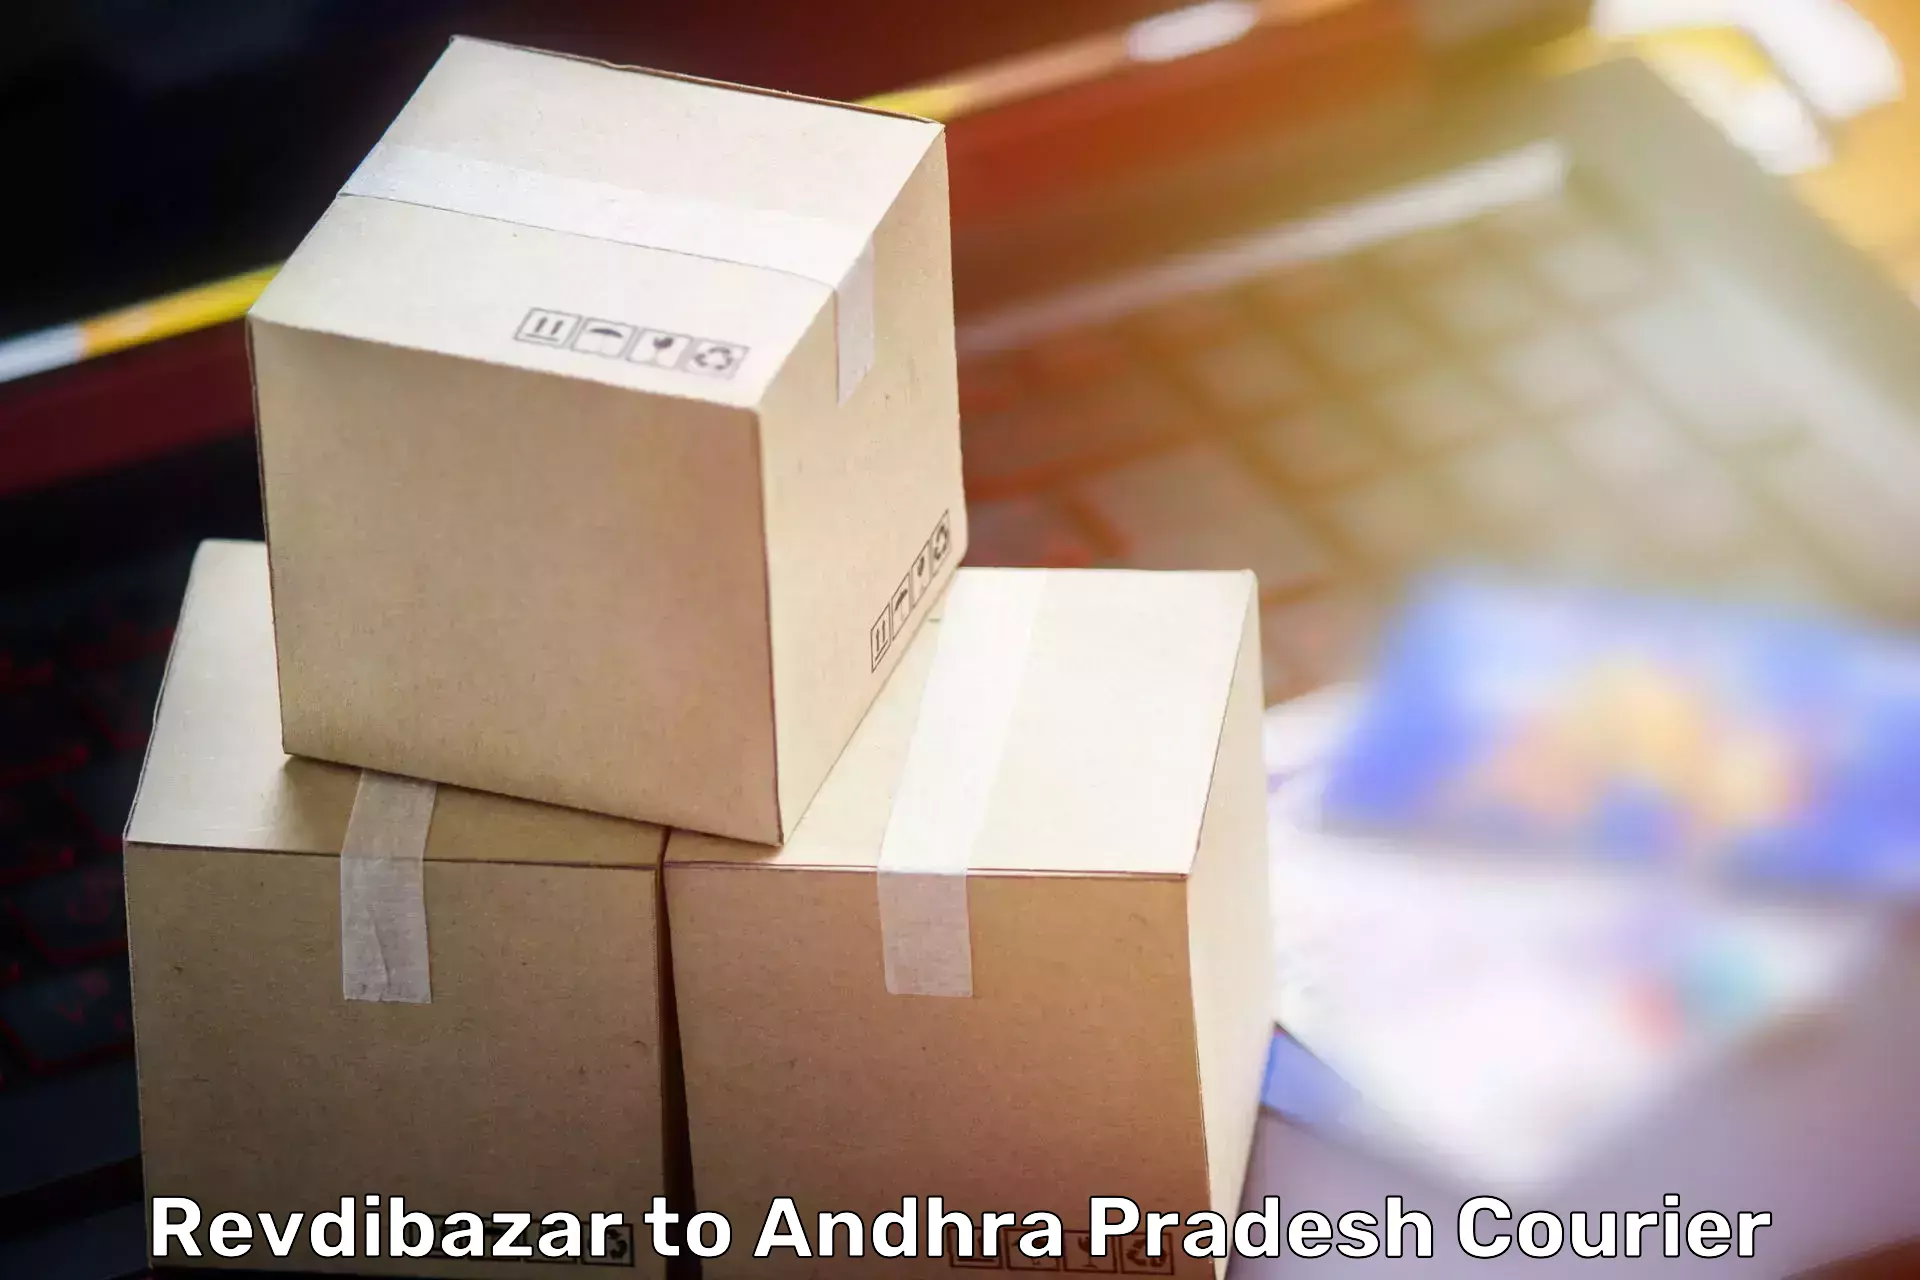 Budget-friendly movers Revdibazar to Gampalagudem